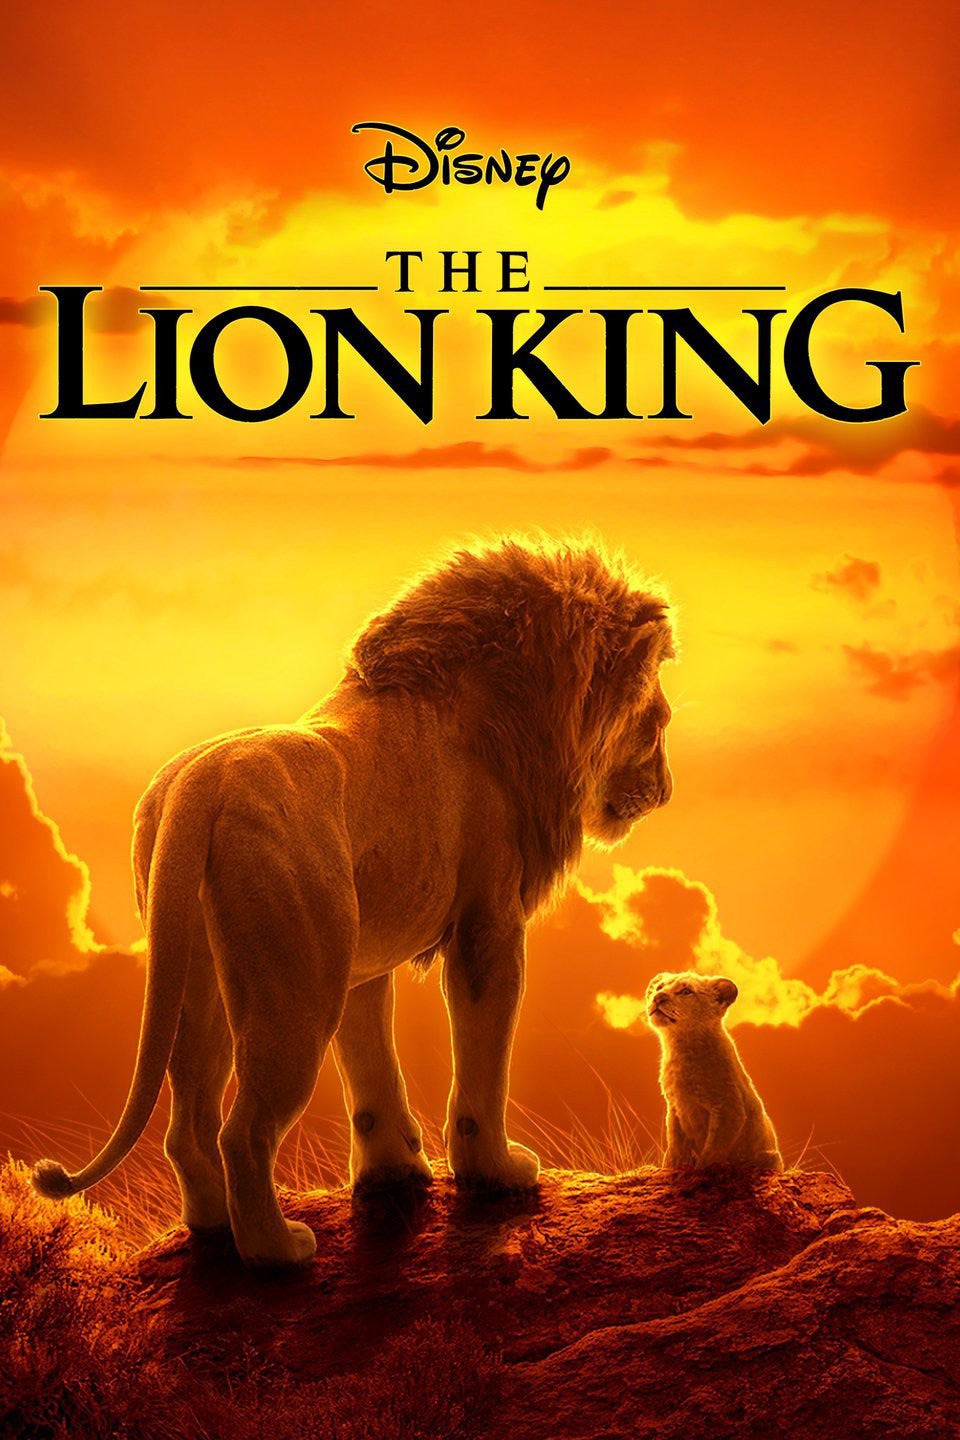 The Lion King (2019) Vudu or Movies Anywhere HD redemption only